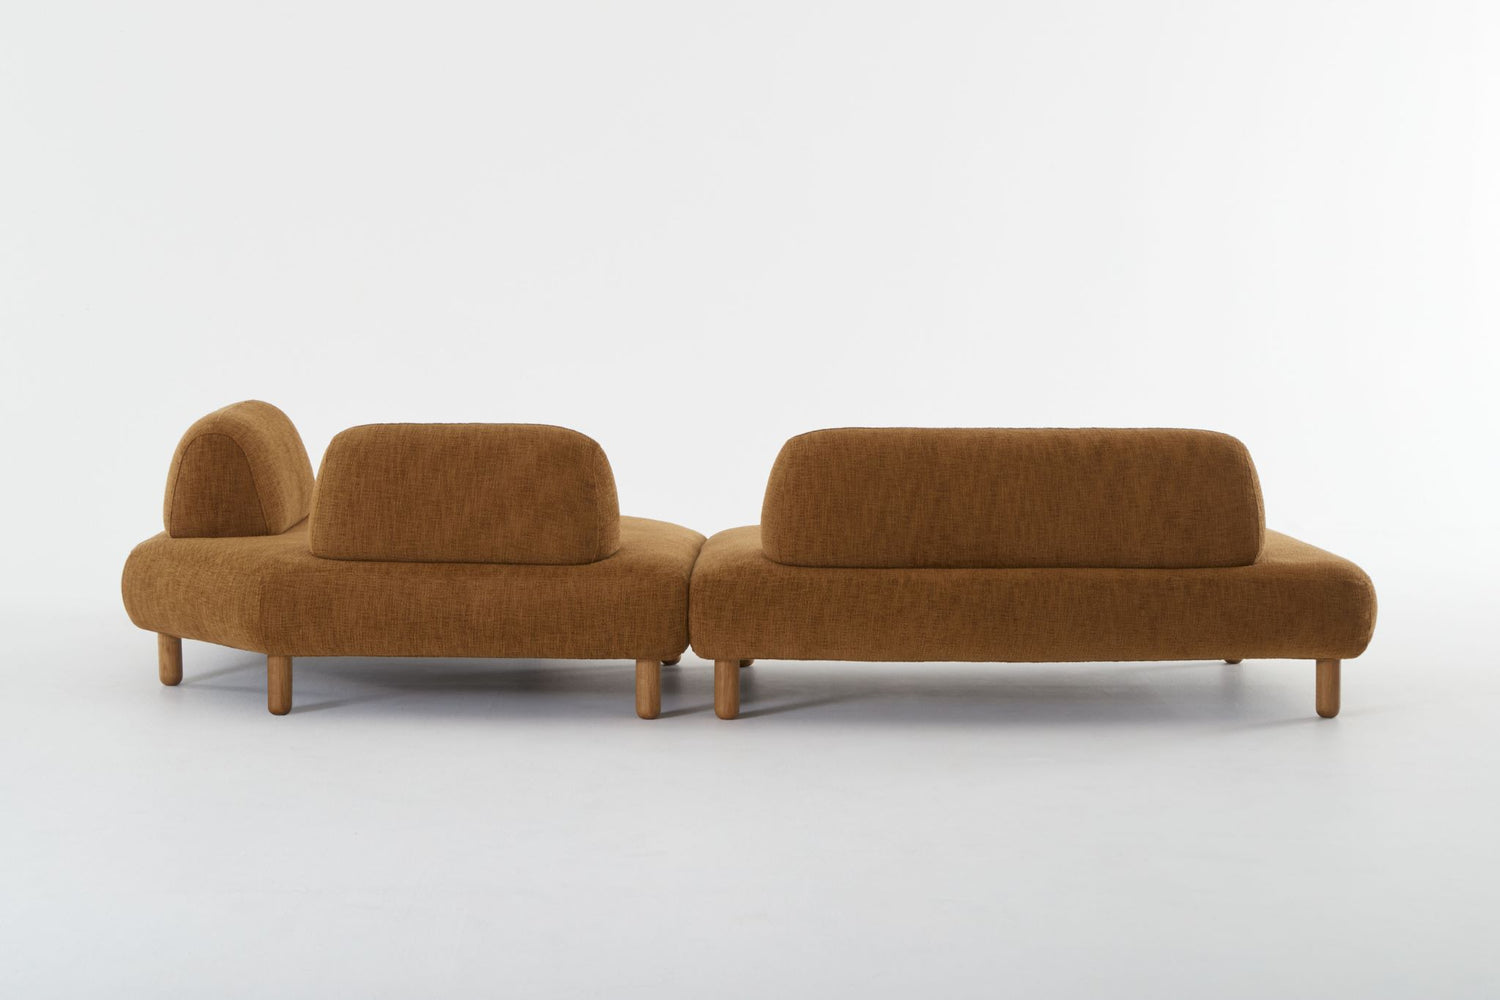 Two modules of the Locus sofa in burnt sienna viewed from the back.